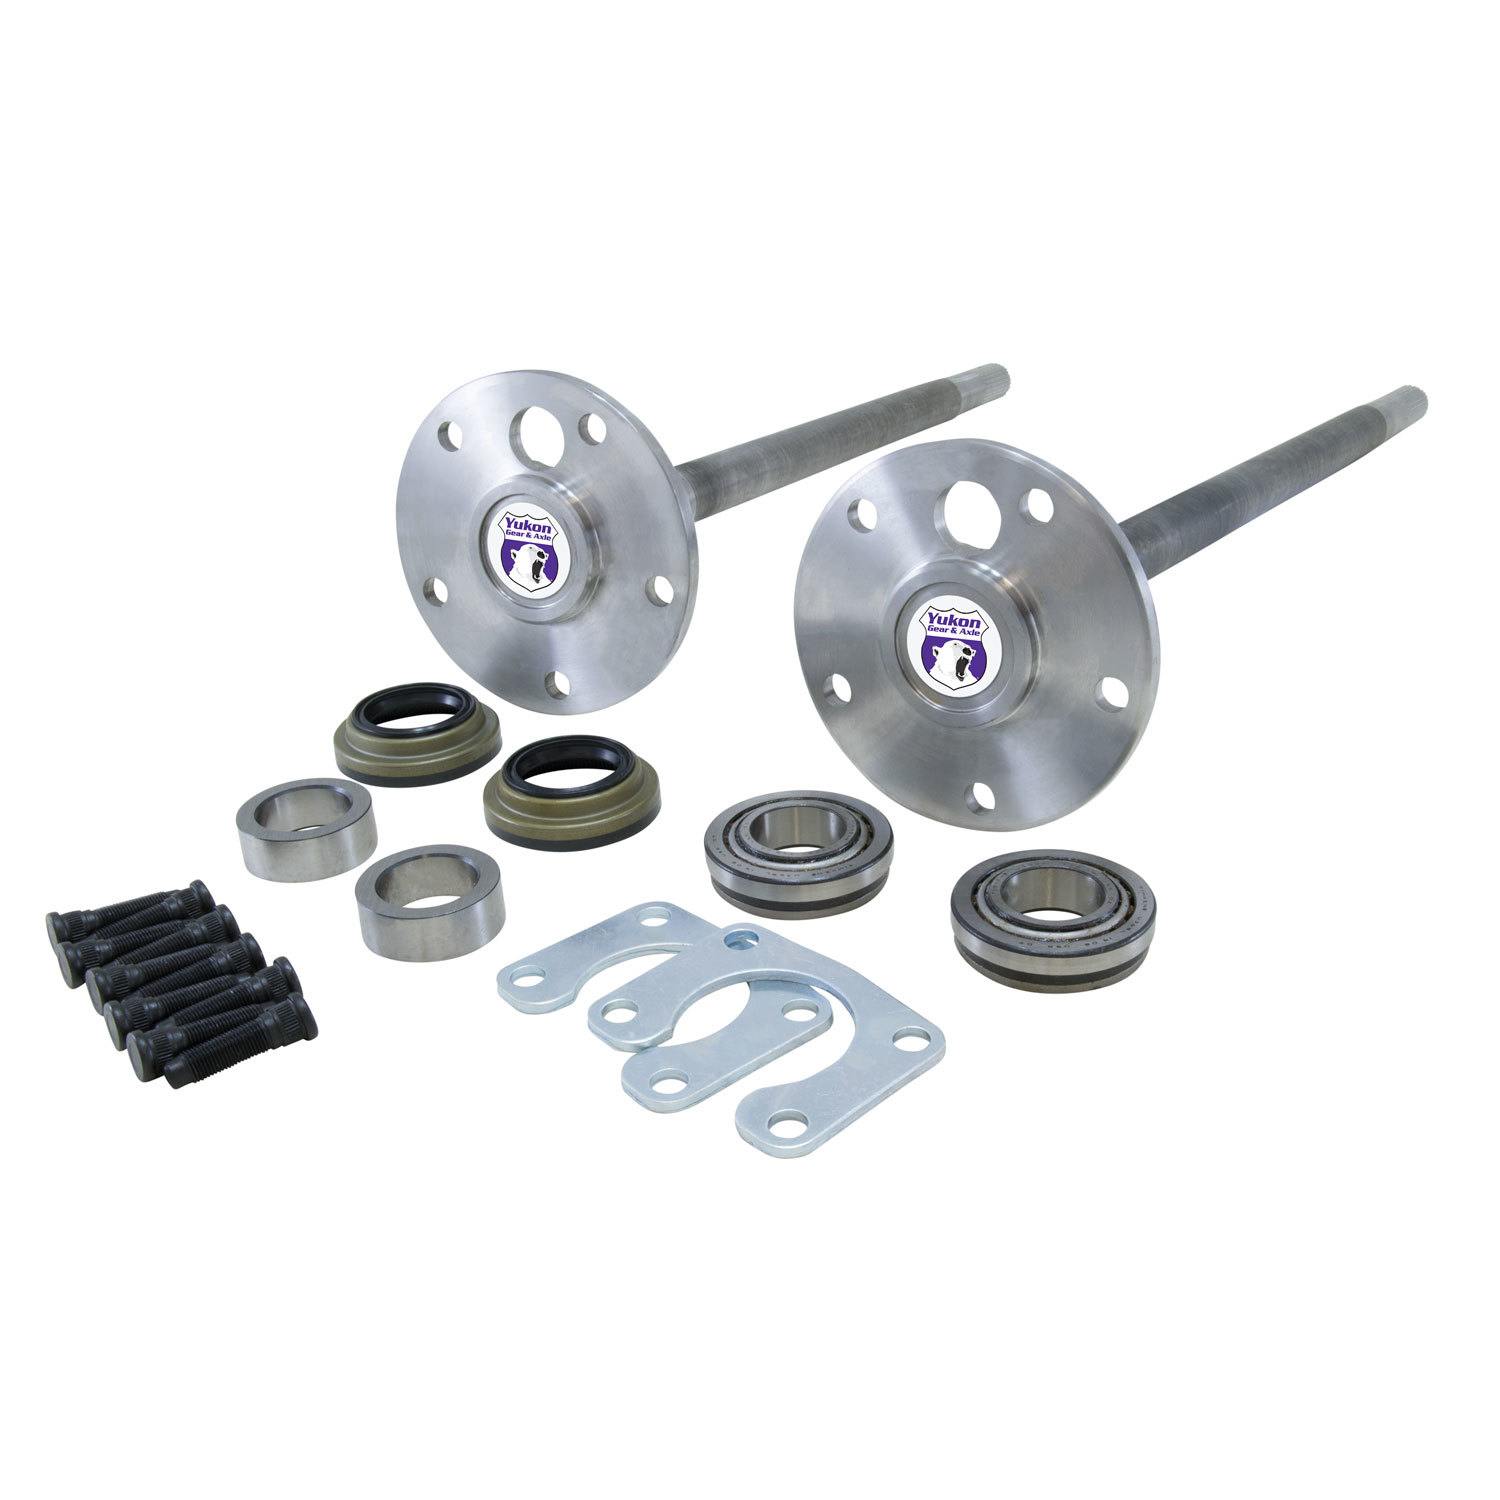 Yukon 1541H alloy rear axle kit for Ford 9" Bronco from '74-'75 with 35 splines 